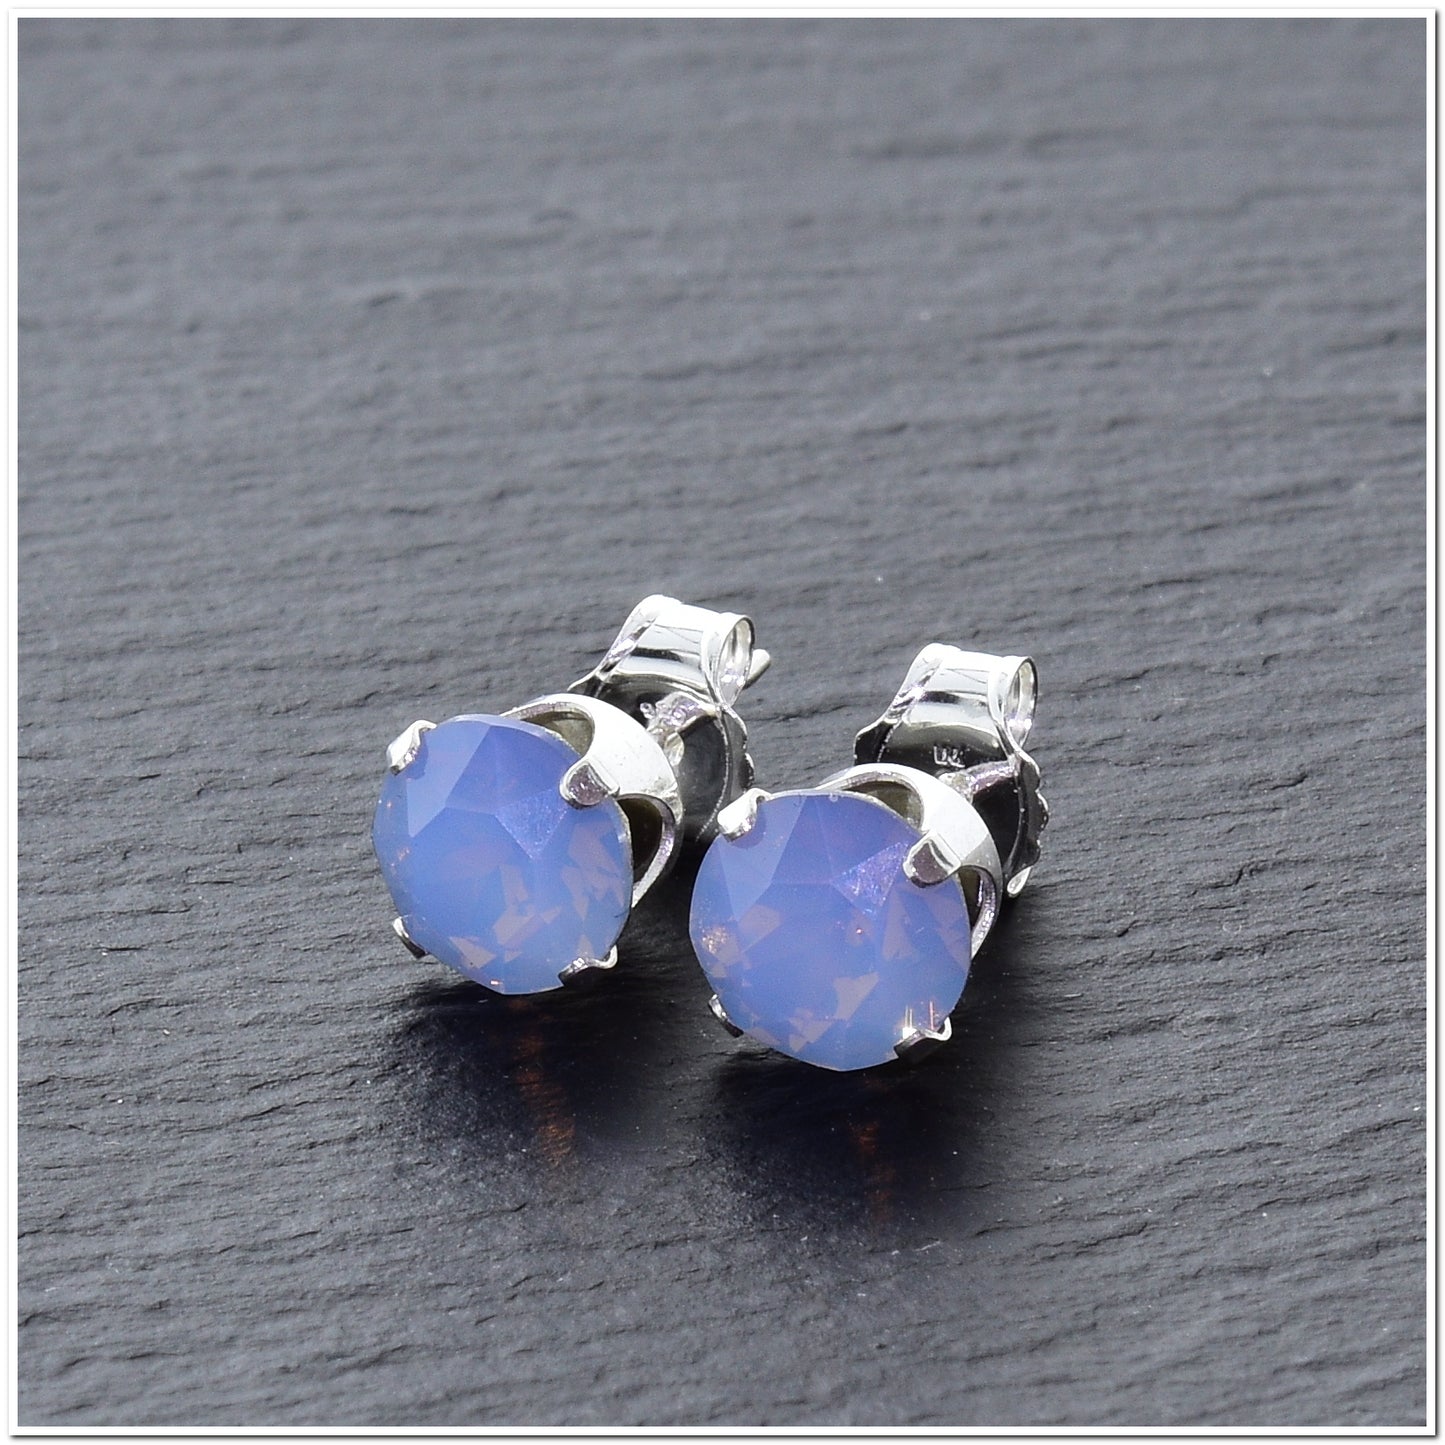 pewterhooter® Women's Classic Collection 925 Sterling silver earrings with sparkling Air Blue Opal crystals, packaged in a gift box for any occasion.